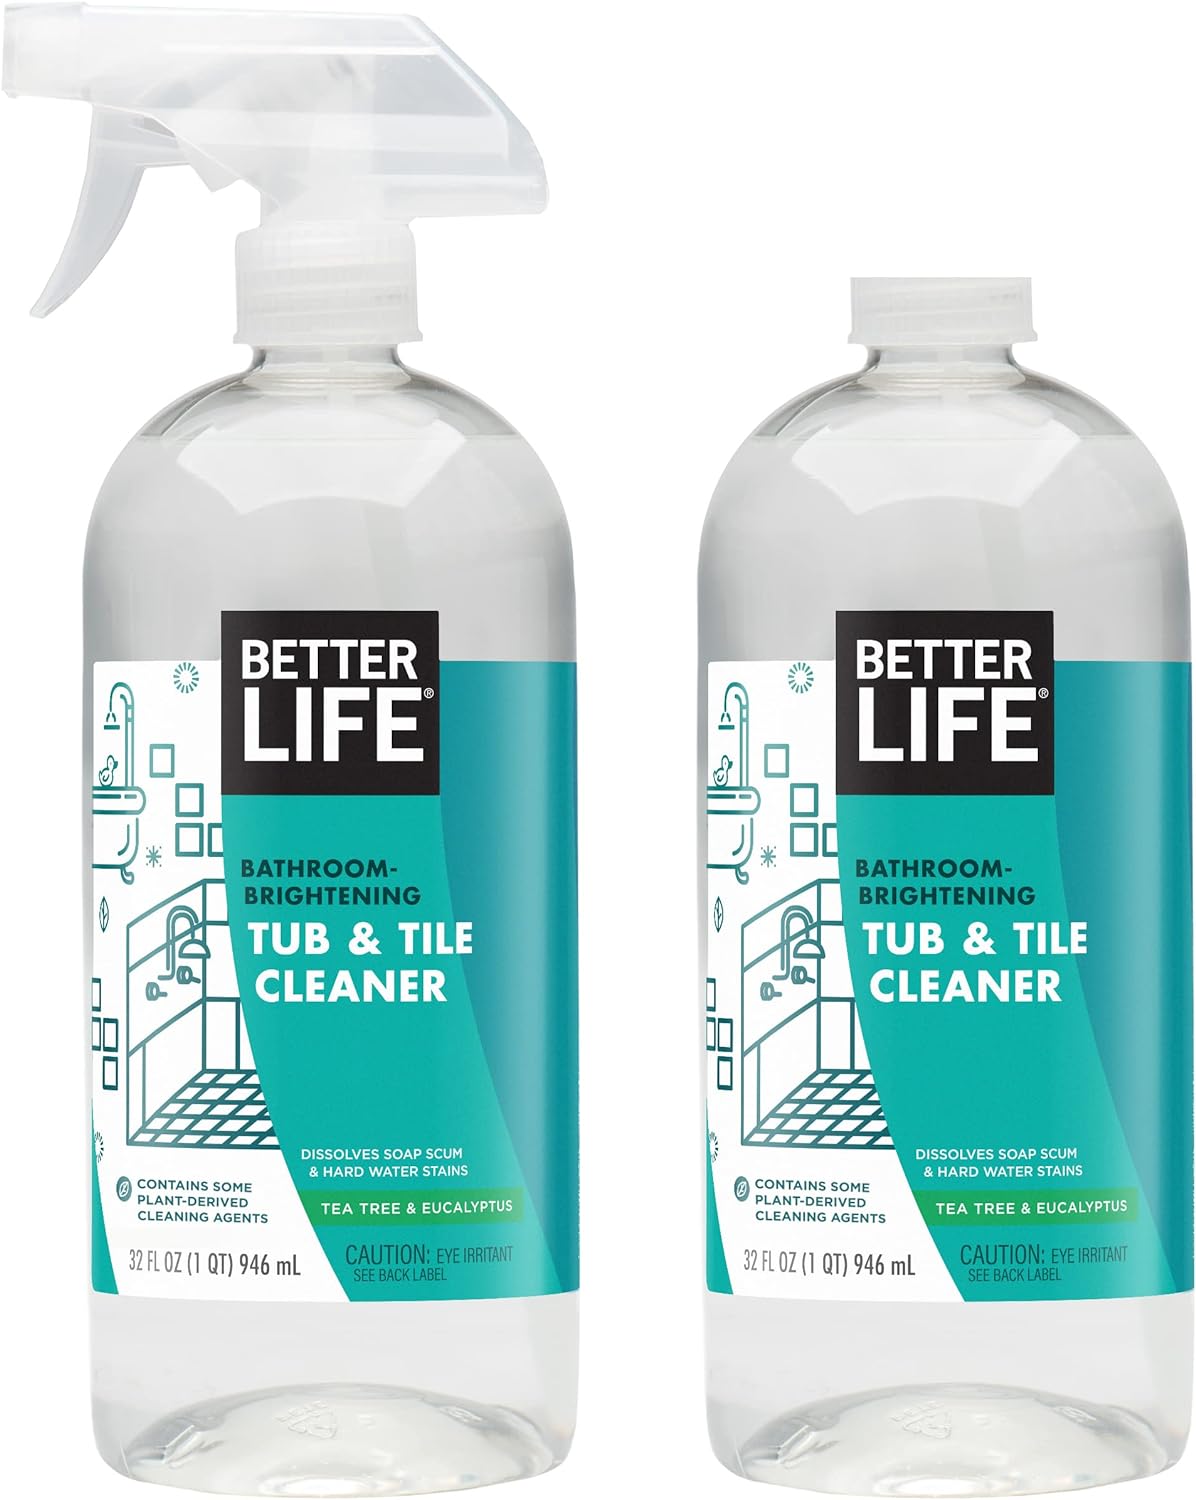 Ive used other non-harsh, eco friendly bathroom cleaners and the smell is still so strong. After trying this, Im convinced I wont buy anything else for my bathroom cleaning needs. Got out the grime, no residue left behind, and no overpowering smell! Now, I dont feel the need to kick my toddler out of the bathroom while I spray it down.